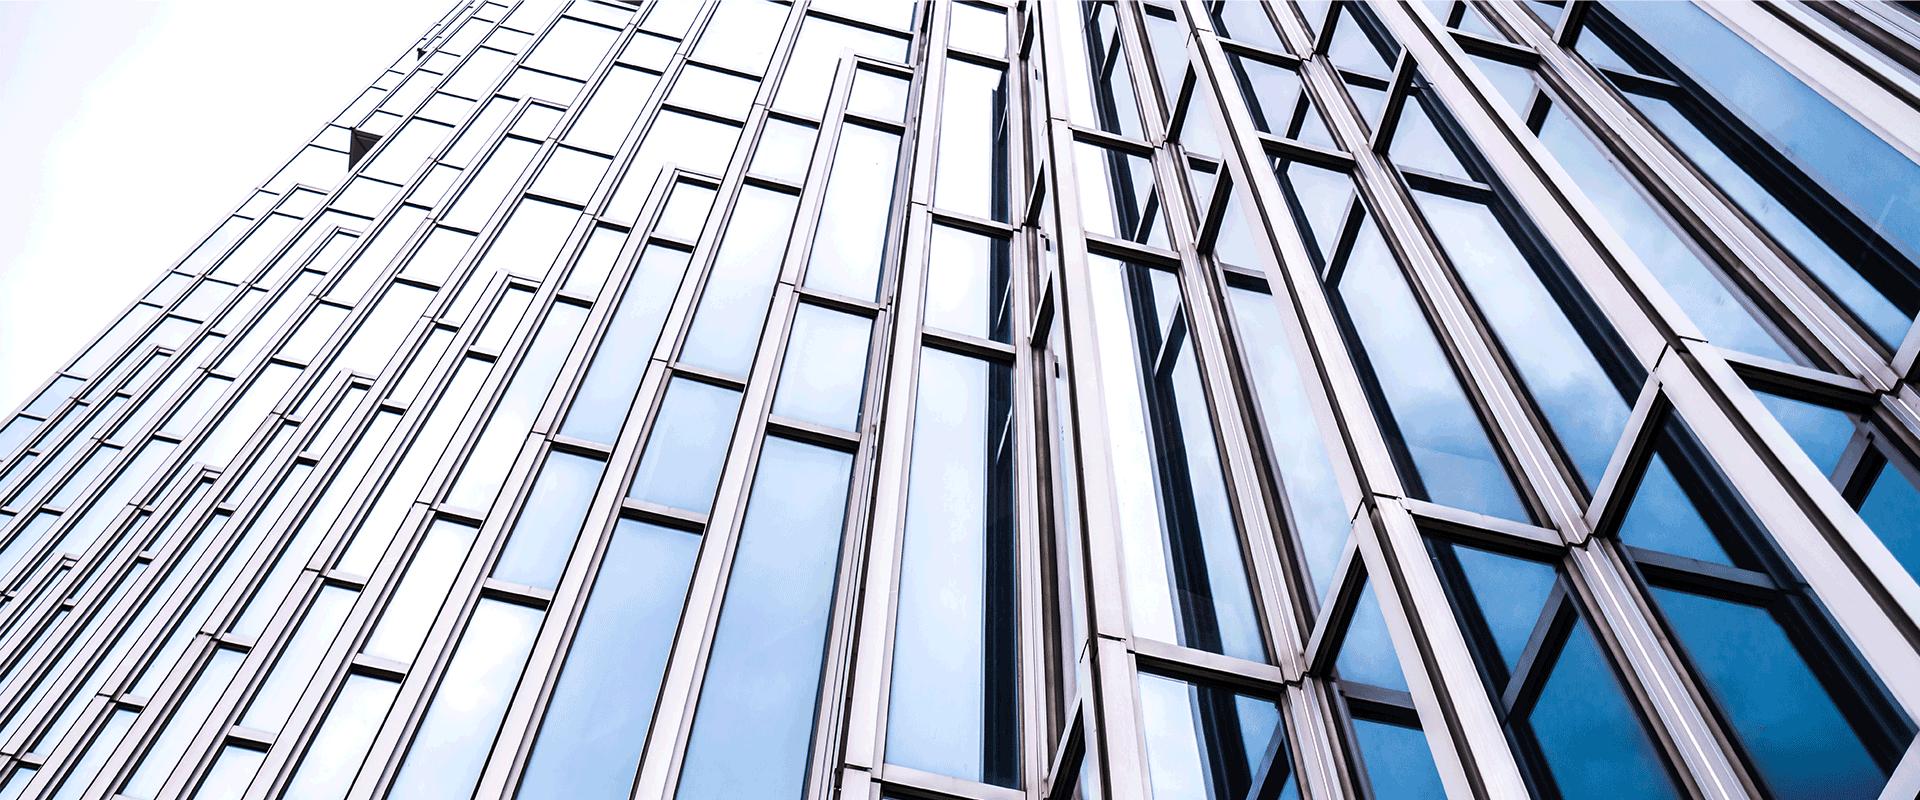 abstract image of side of building